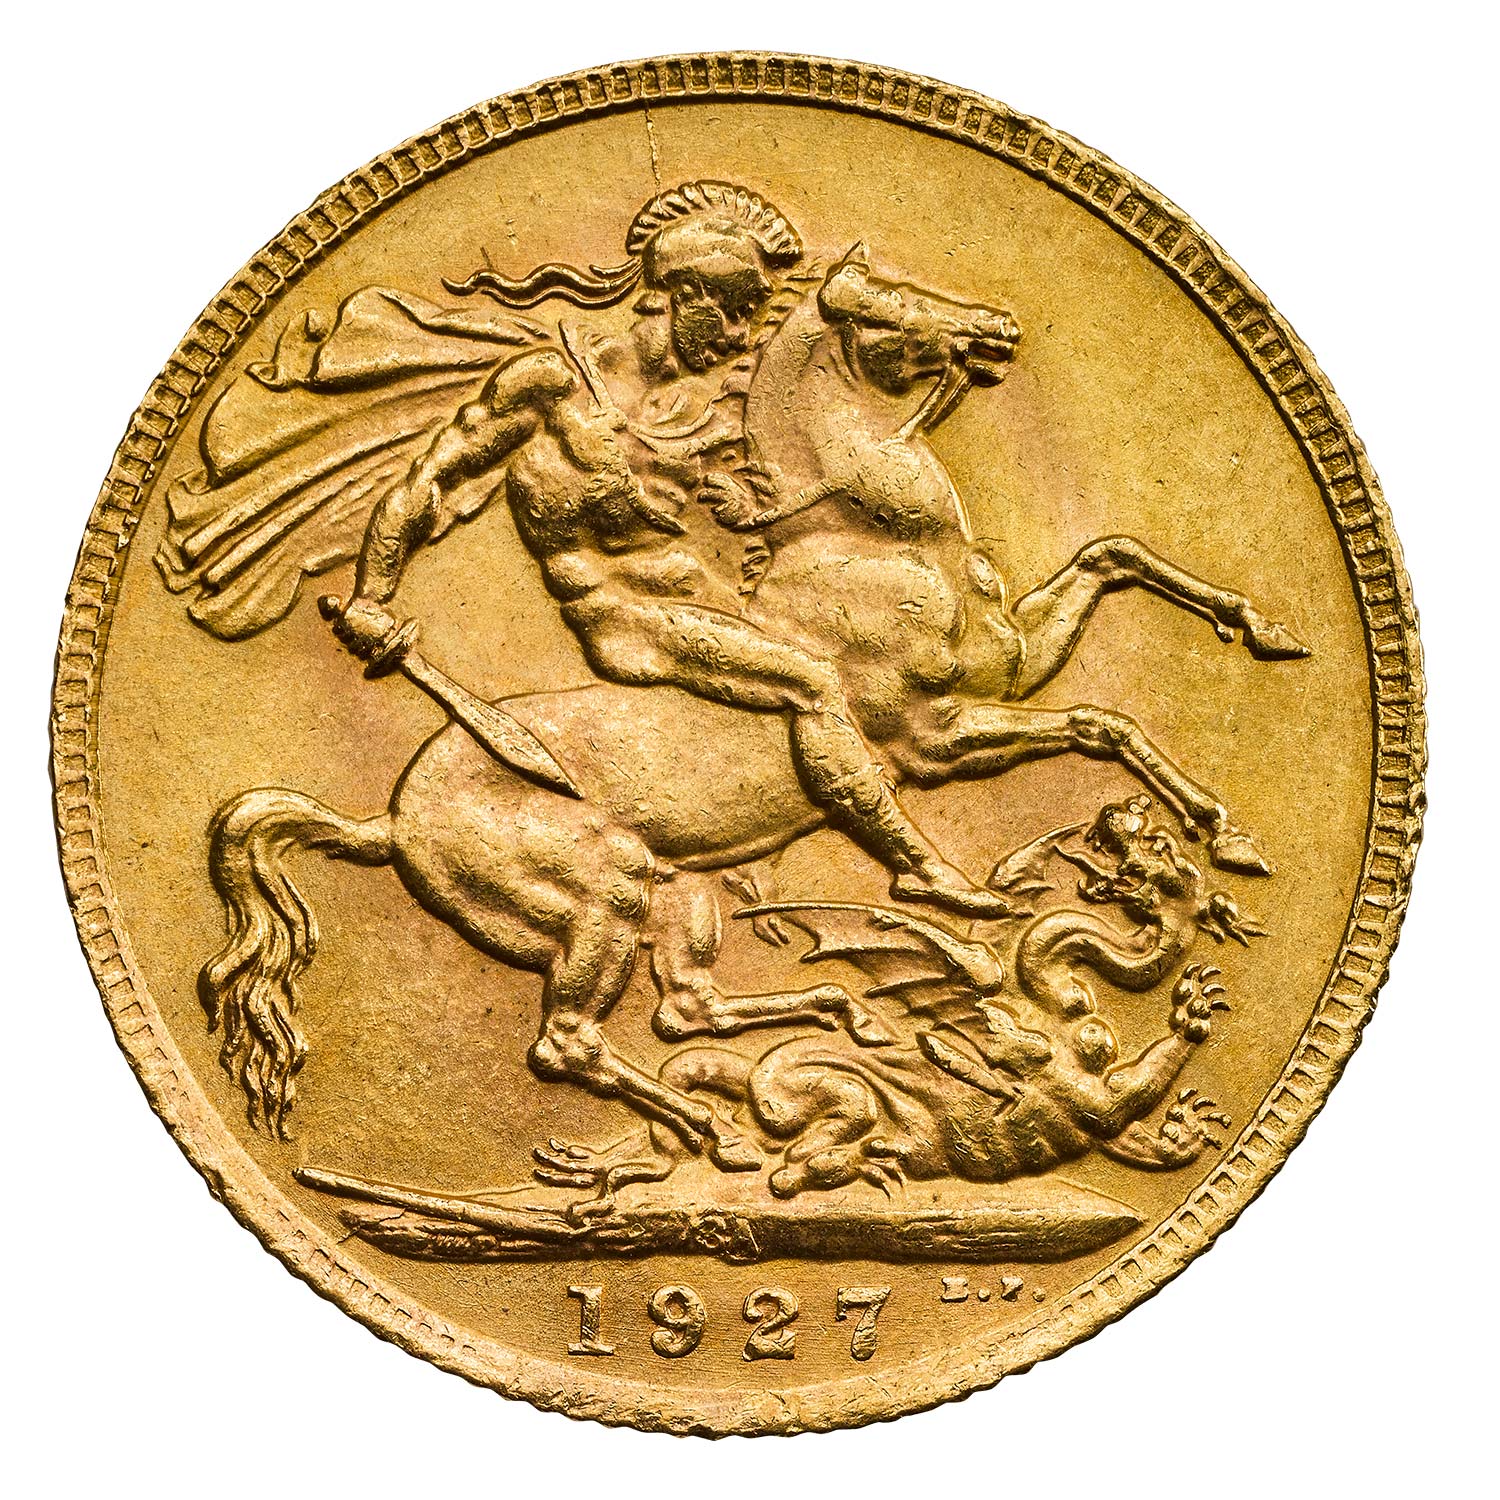 George V Sovereign coin 1927 | The Royal Mint